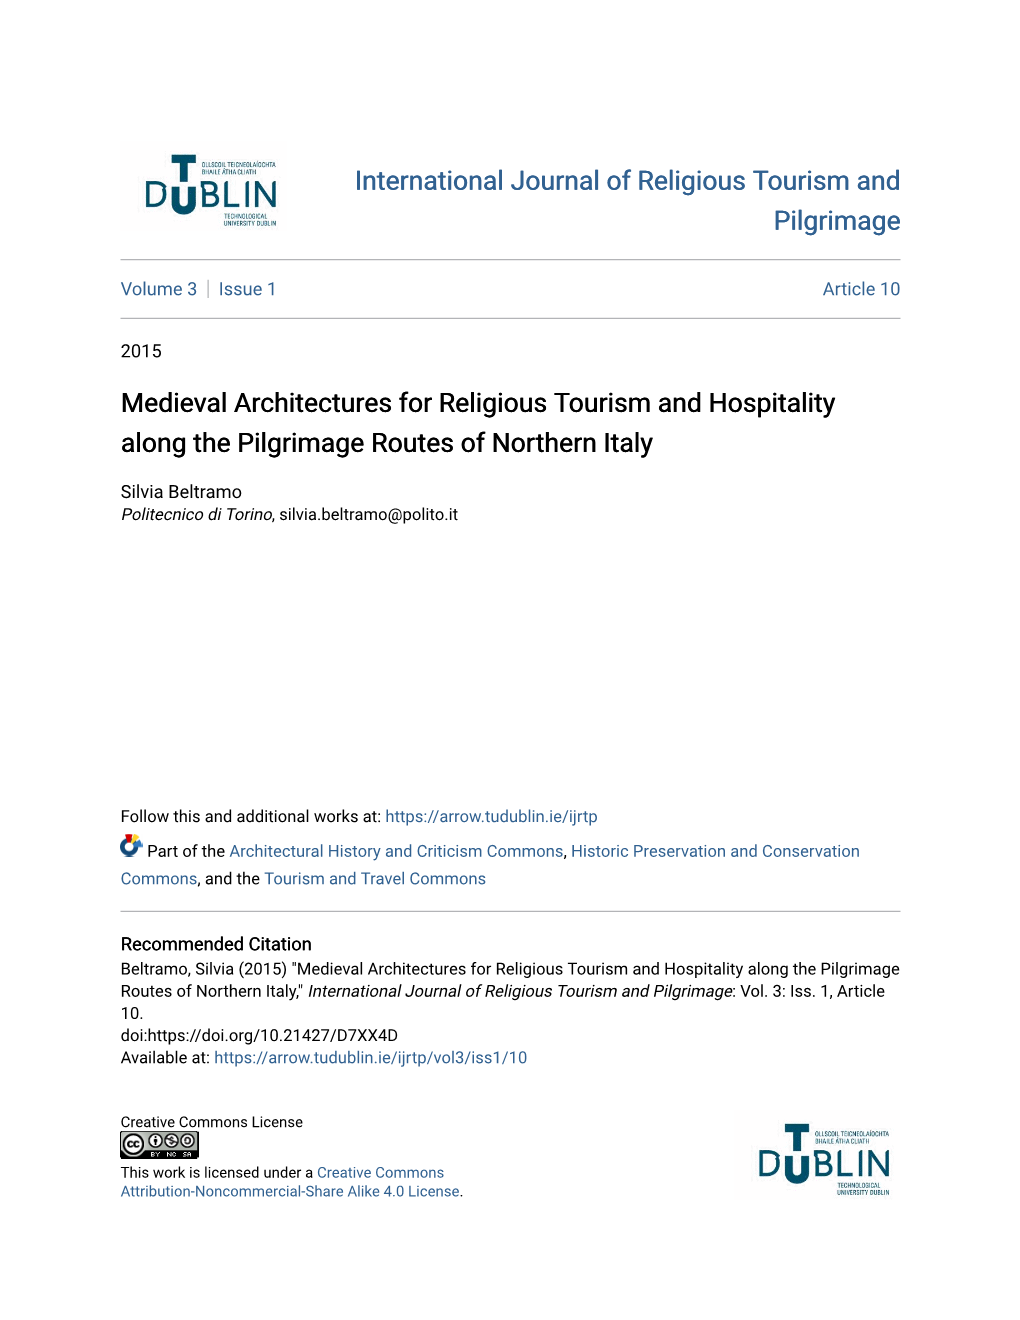 Medieval Architectures for Religious Tourism and Hospitality Along the Pilgrimage Routes of Northern Italy